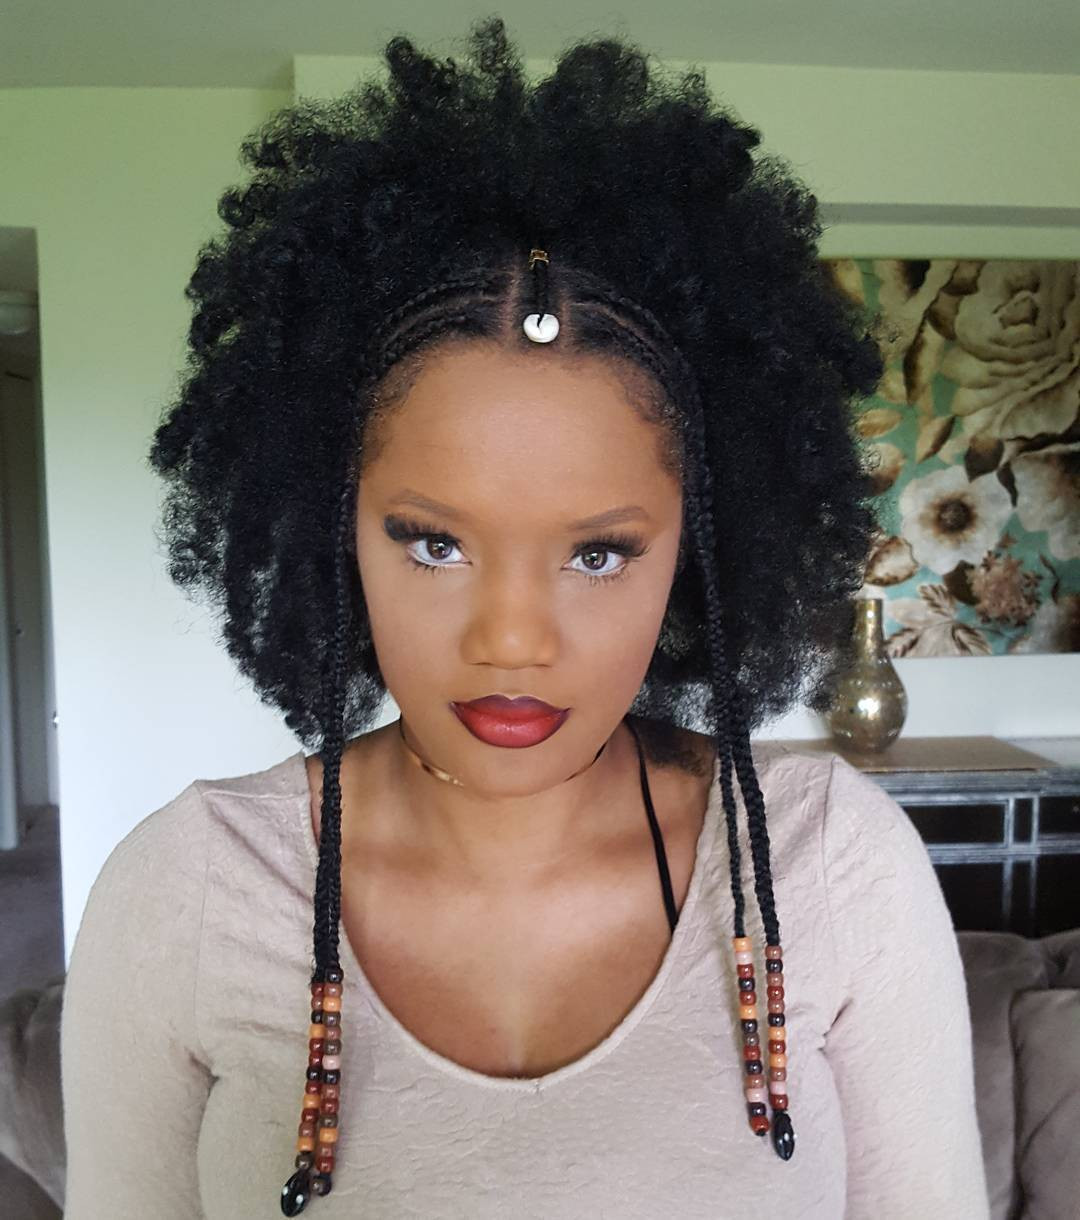 Afro Hairstyles With Braids
 10 Inspirational s of Braids with Beads and Cowrie Shells